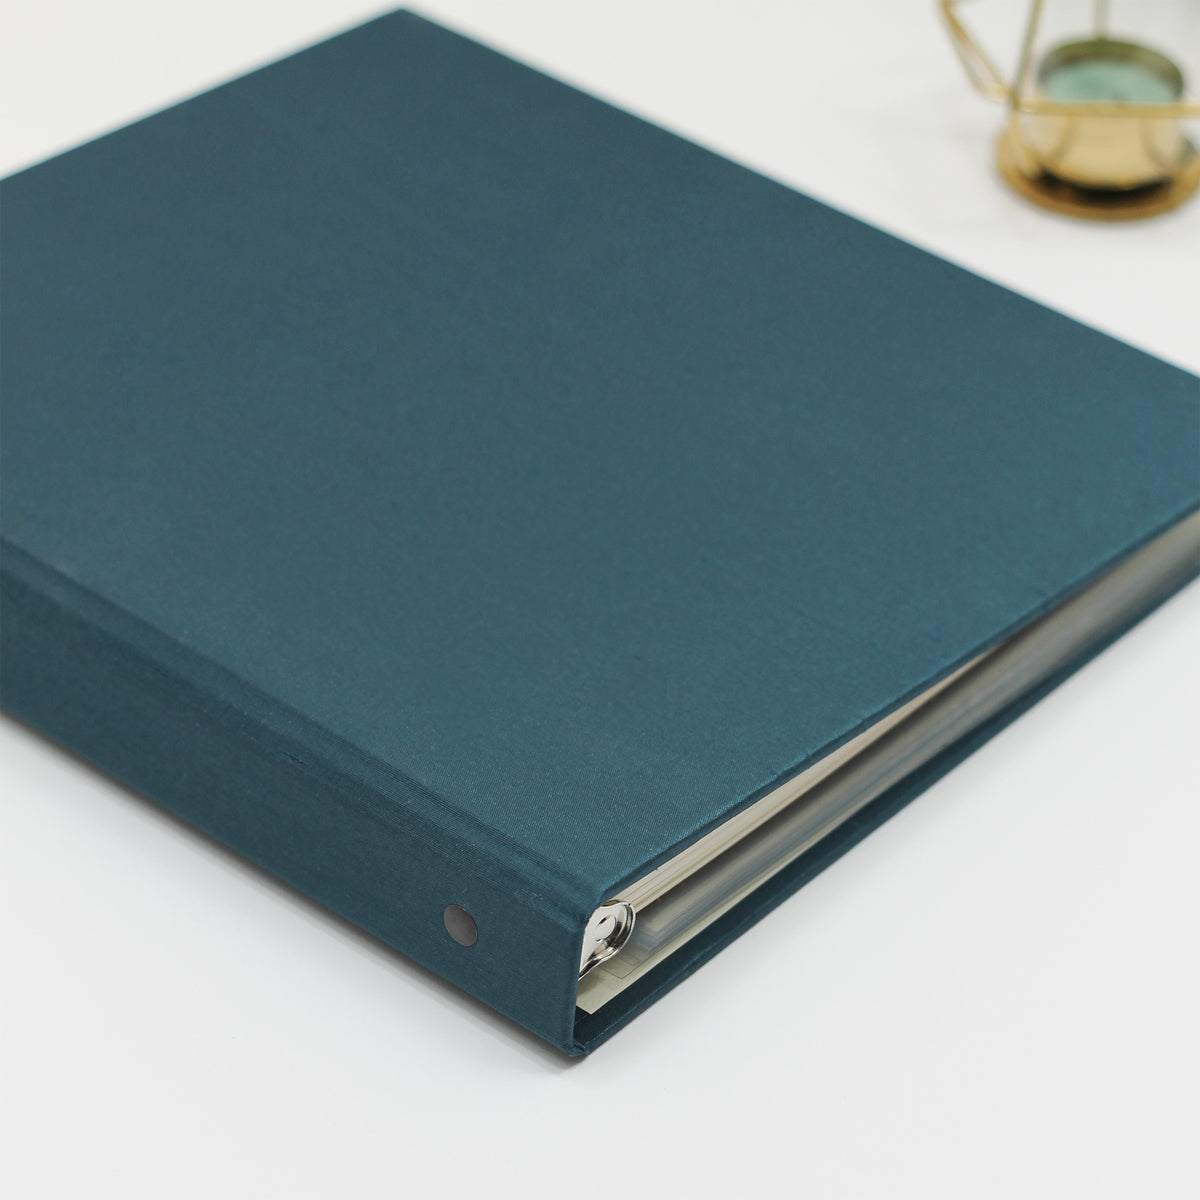 Holiday Card Album | Cover: Teal Blue Silk | Embossed with “Holiday Cards” | Available Personalized